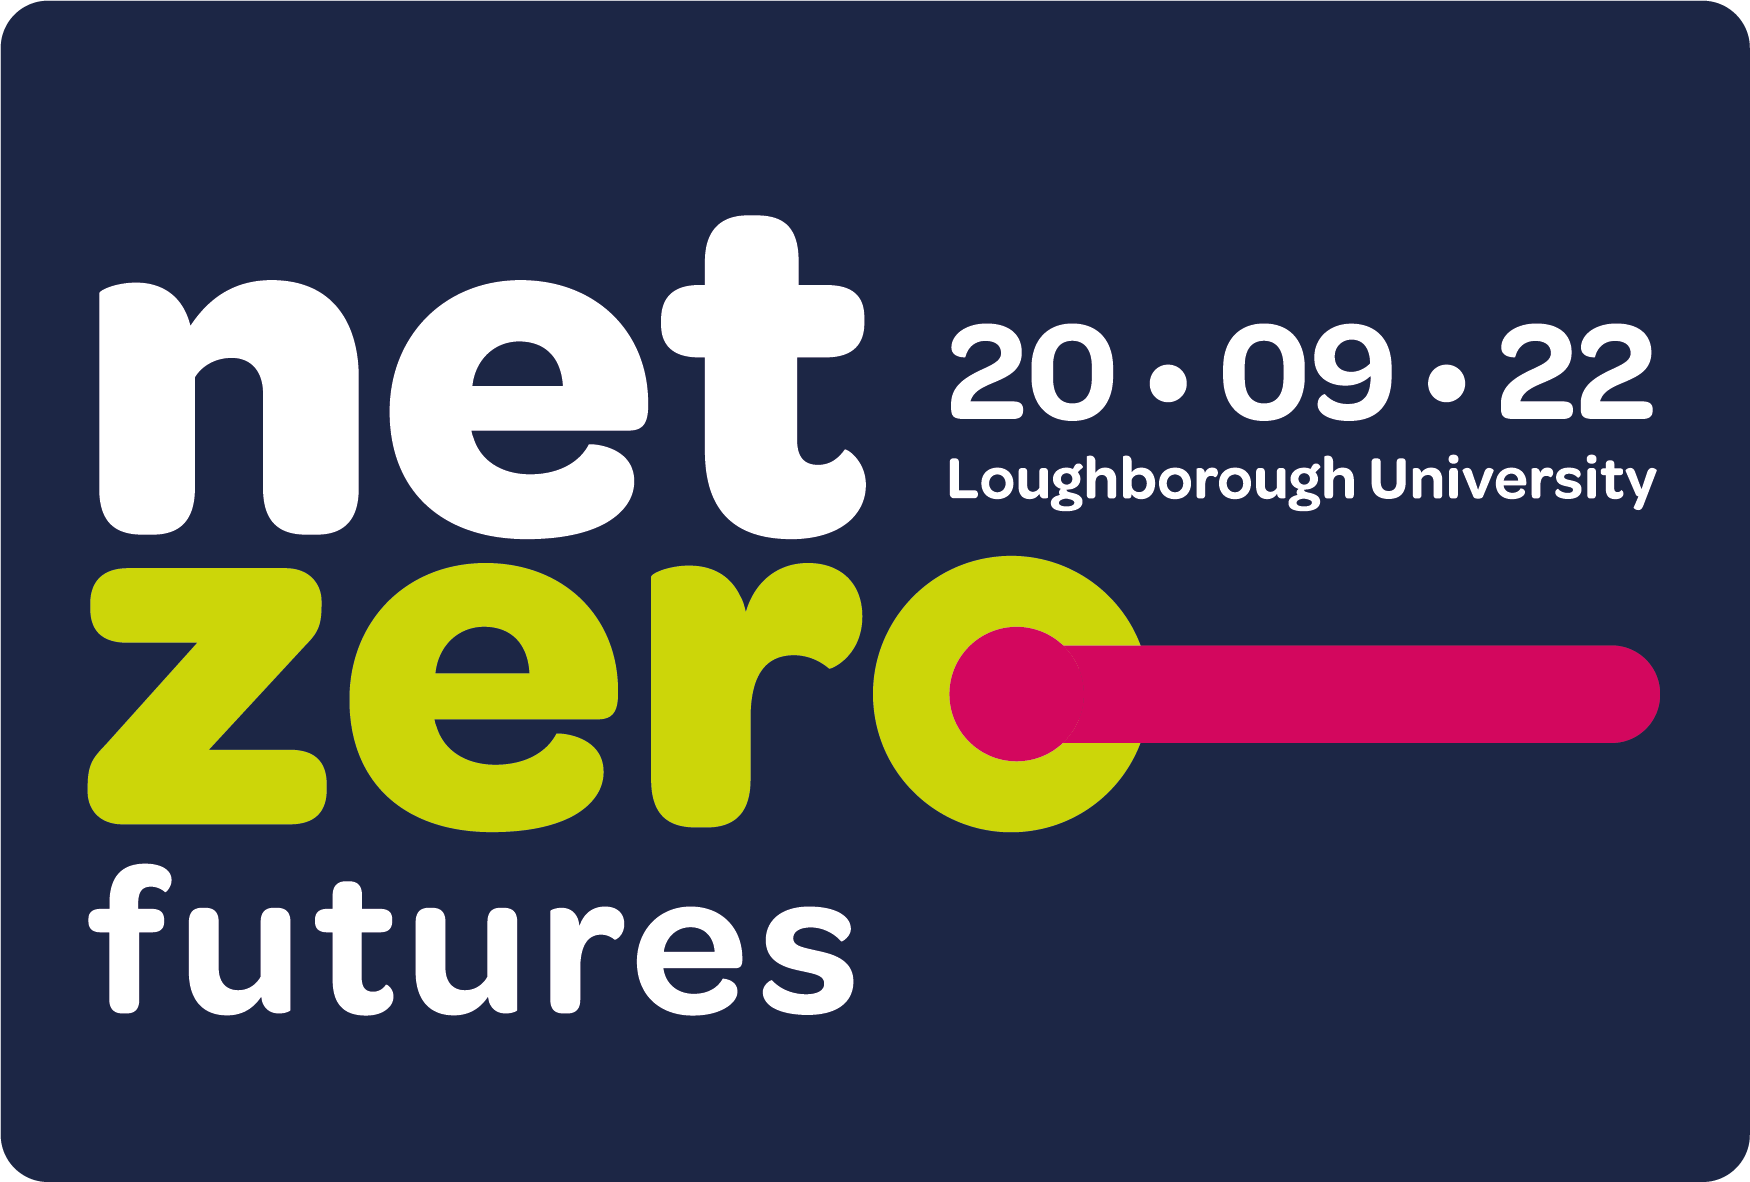 Register for our Net Zero Futures conference: Tuesday 20 September 2022